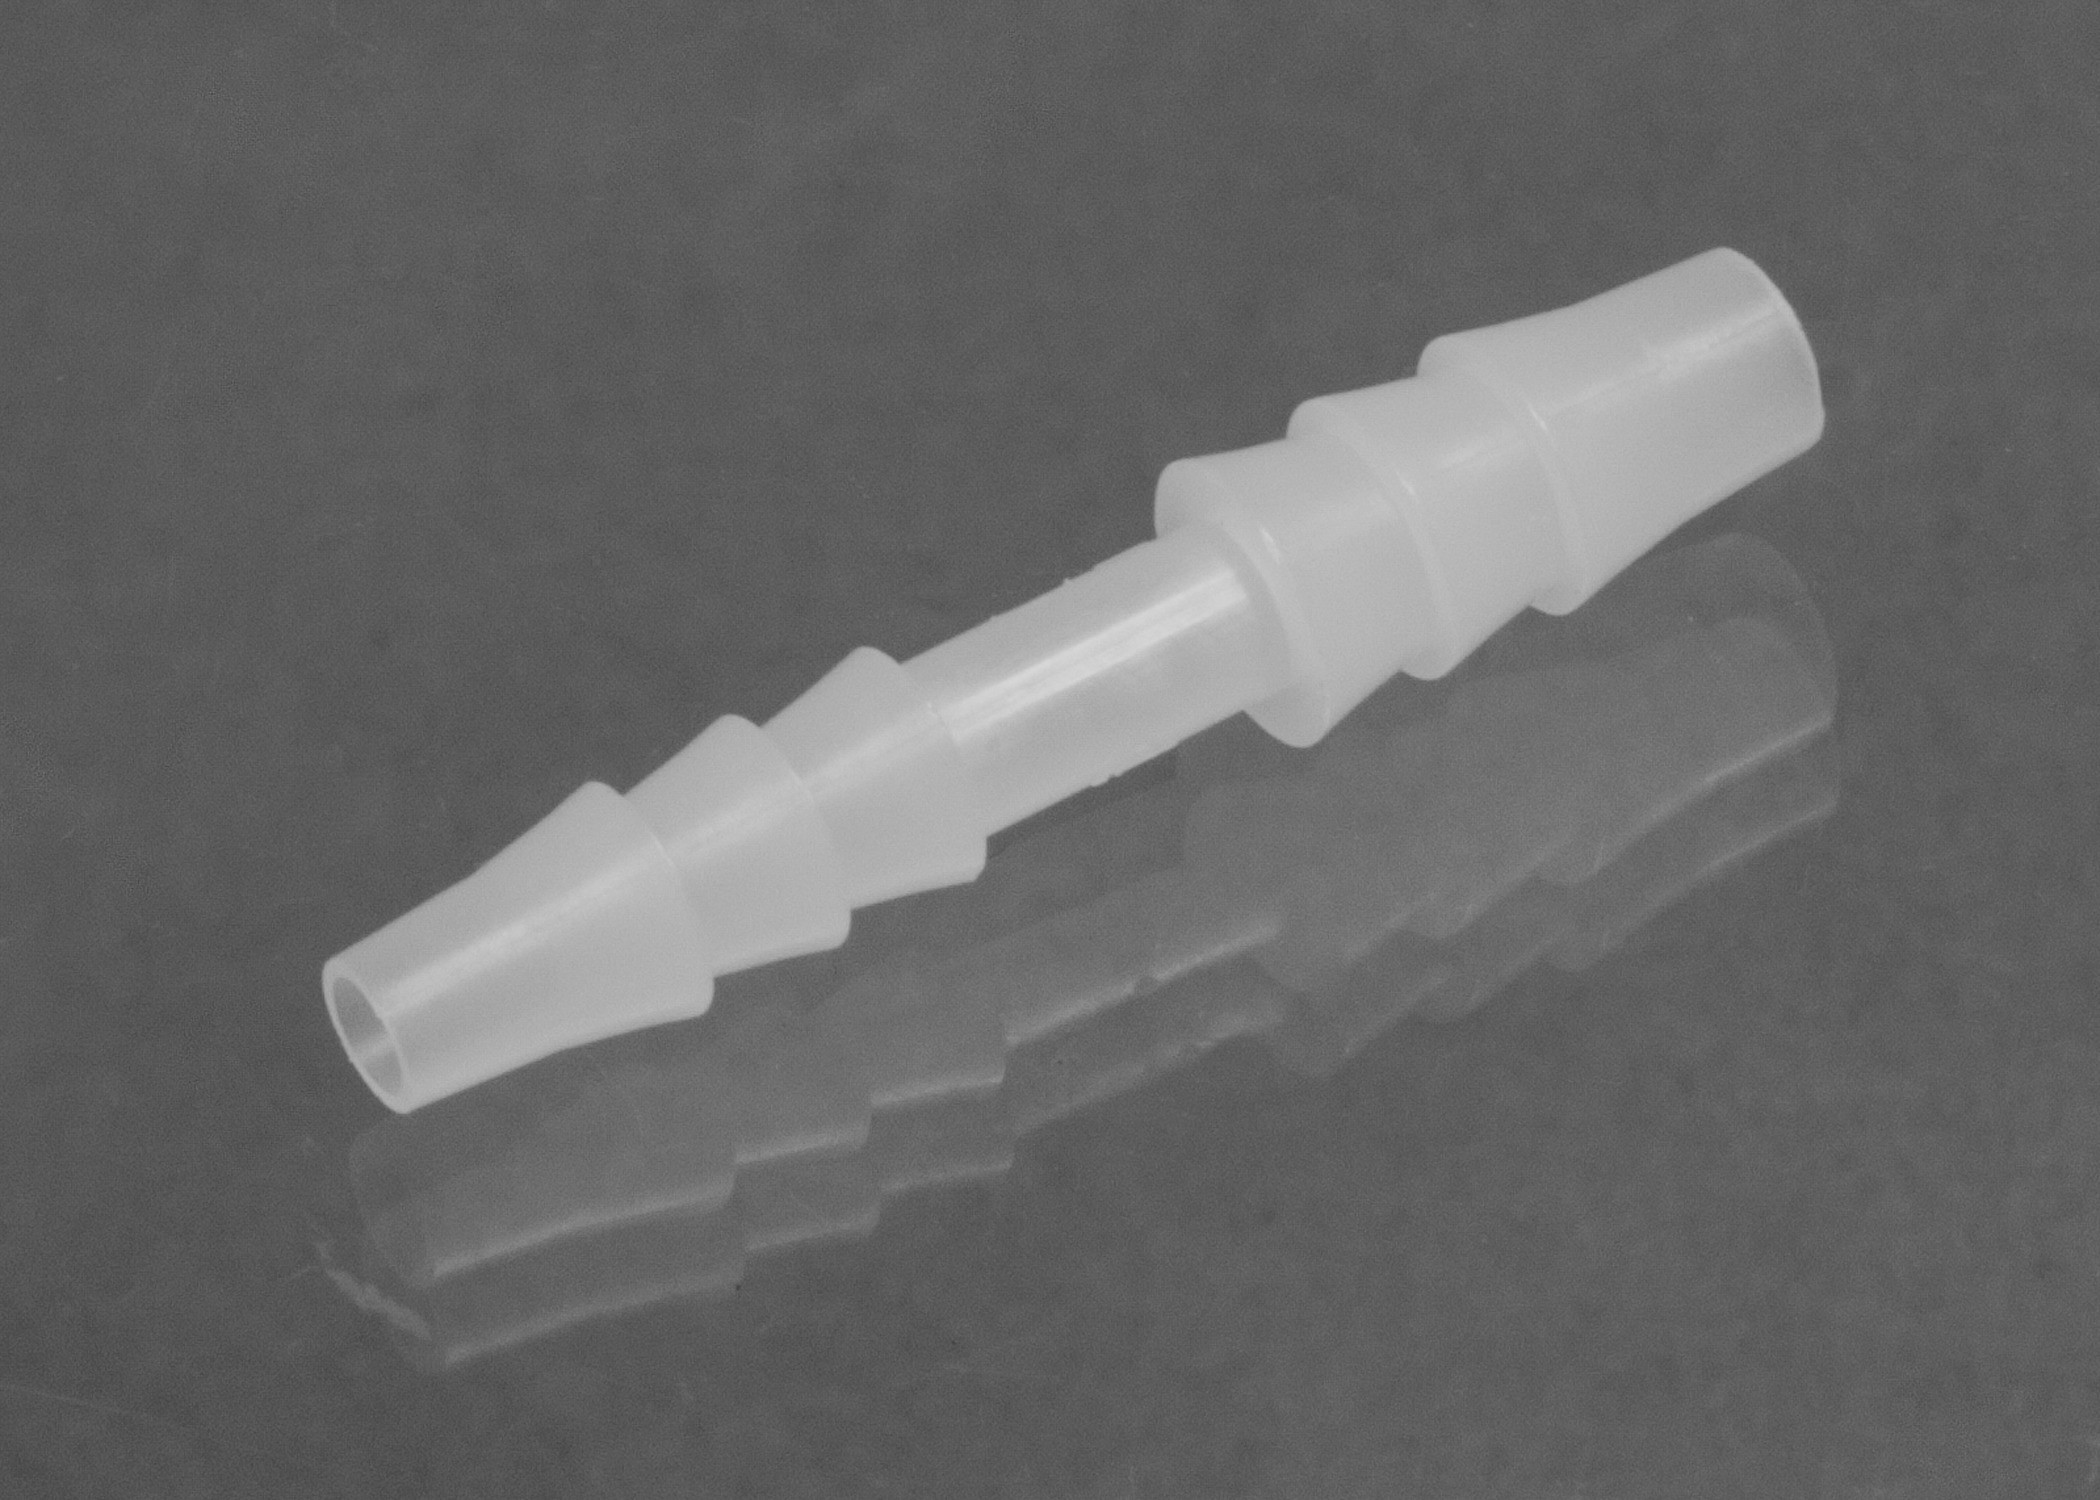 SP Bel-Art Stepped Tubing Connectors for ³⁄₁₆ in. to ¼ in. Tubing; Polypropylene (Pack of 12)